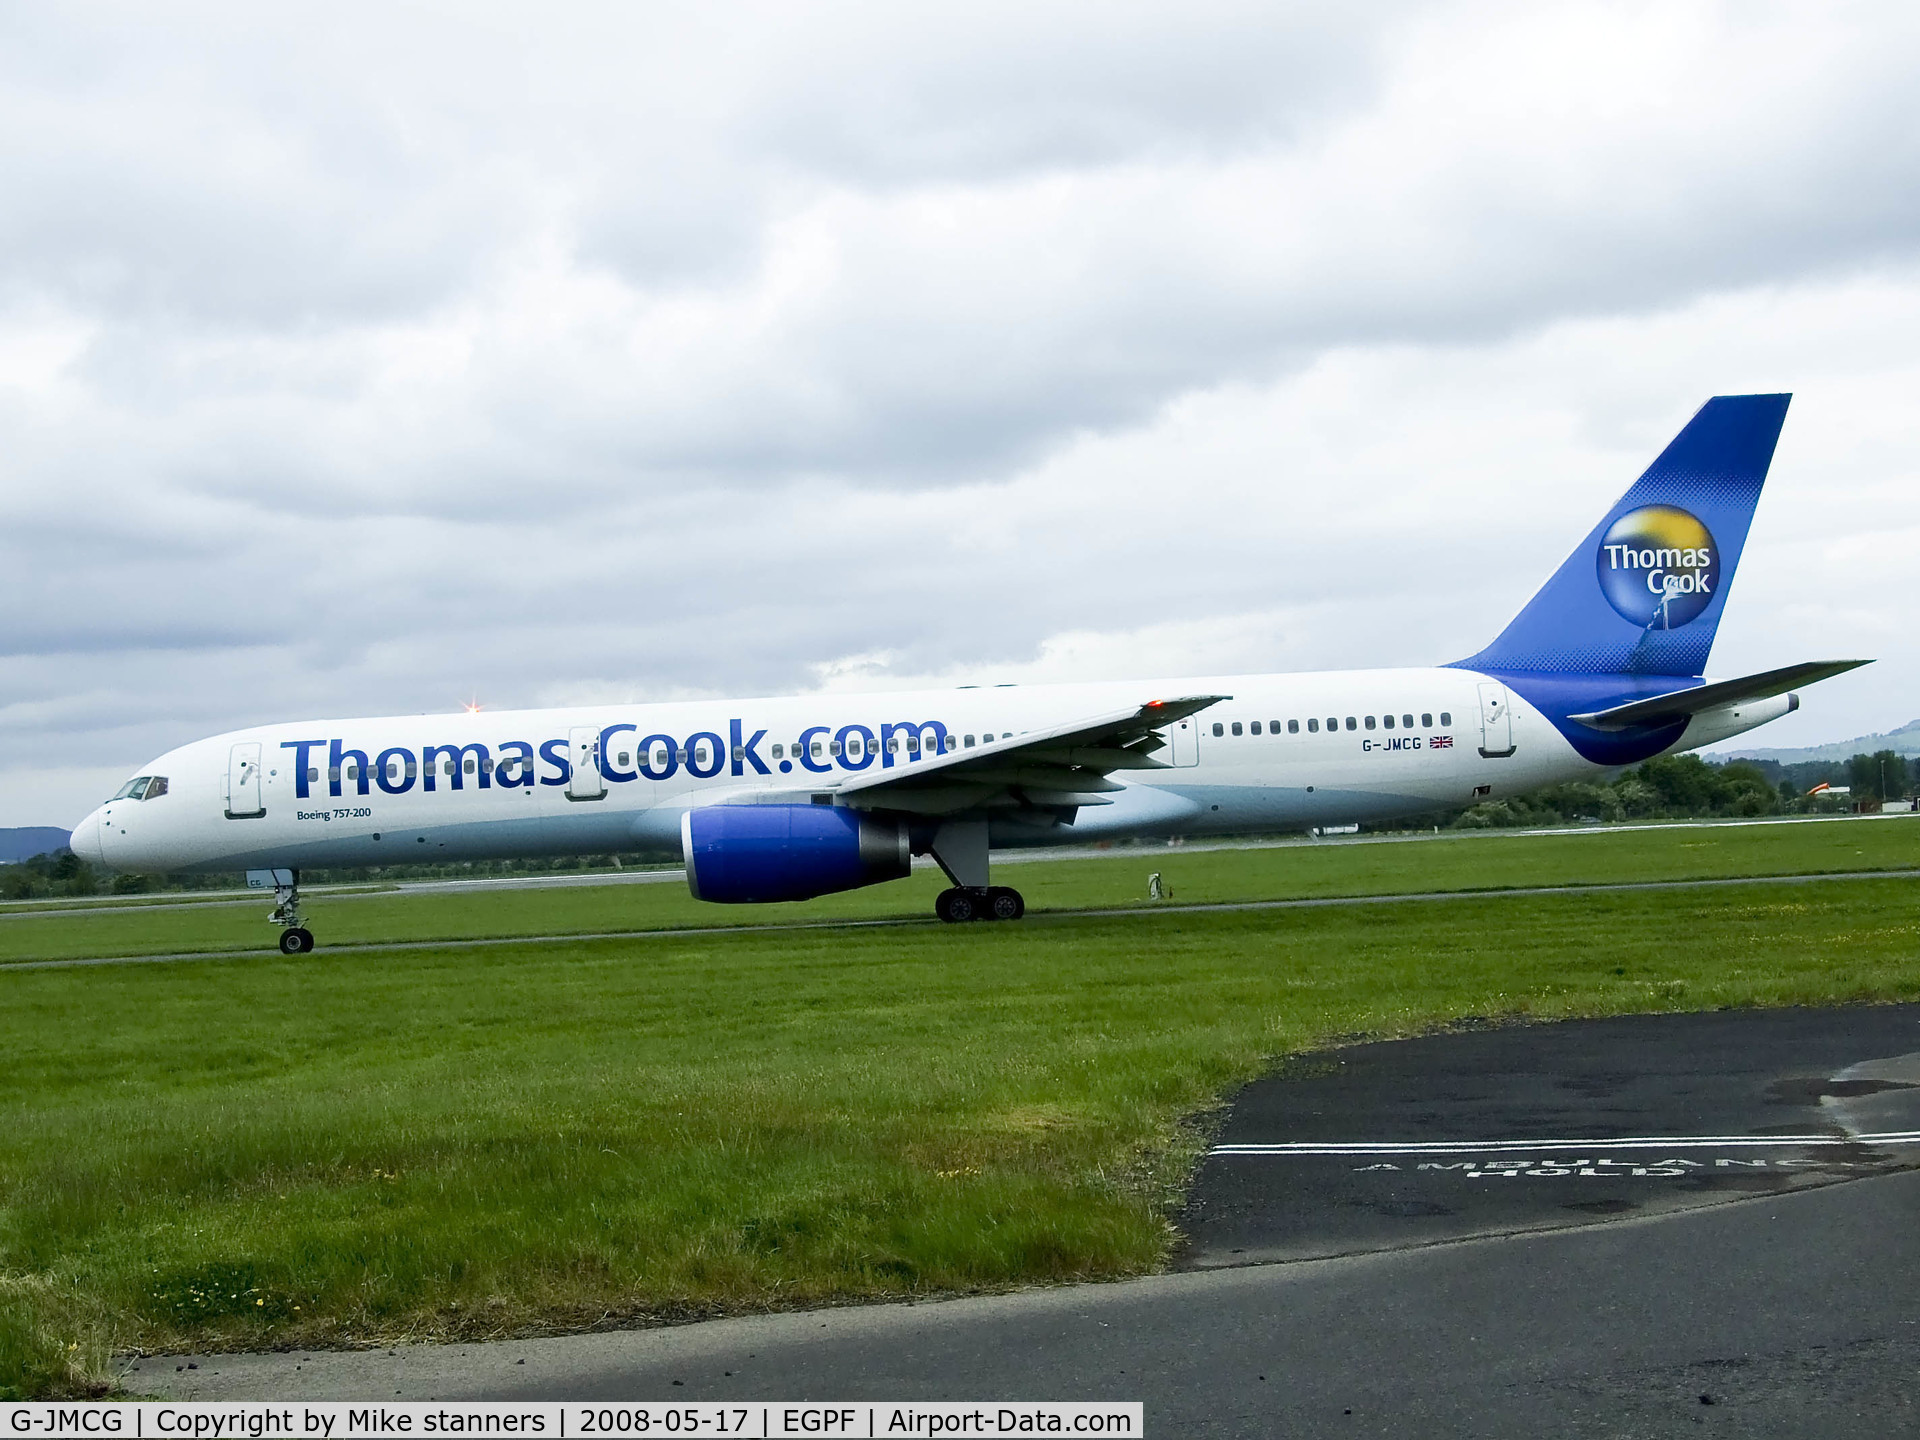 G-JMCG, 1995 Boeing 757-2G5 C/N 26278, Thomas cook B757 Taxiing out at Glasgow on flight TCX9642